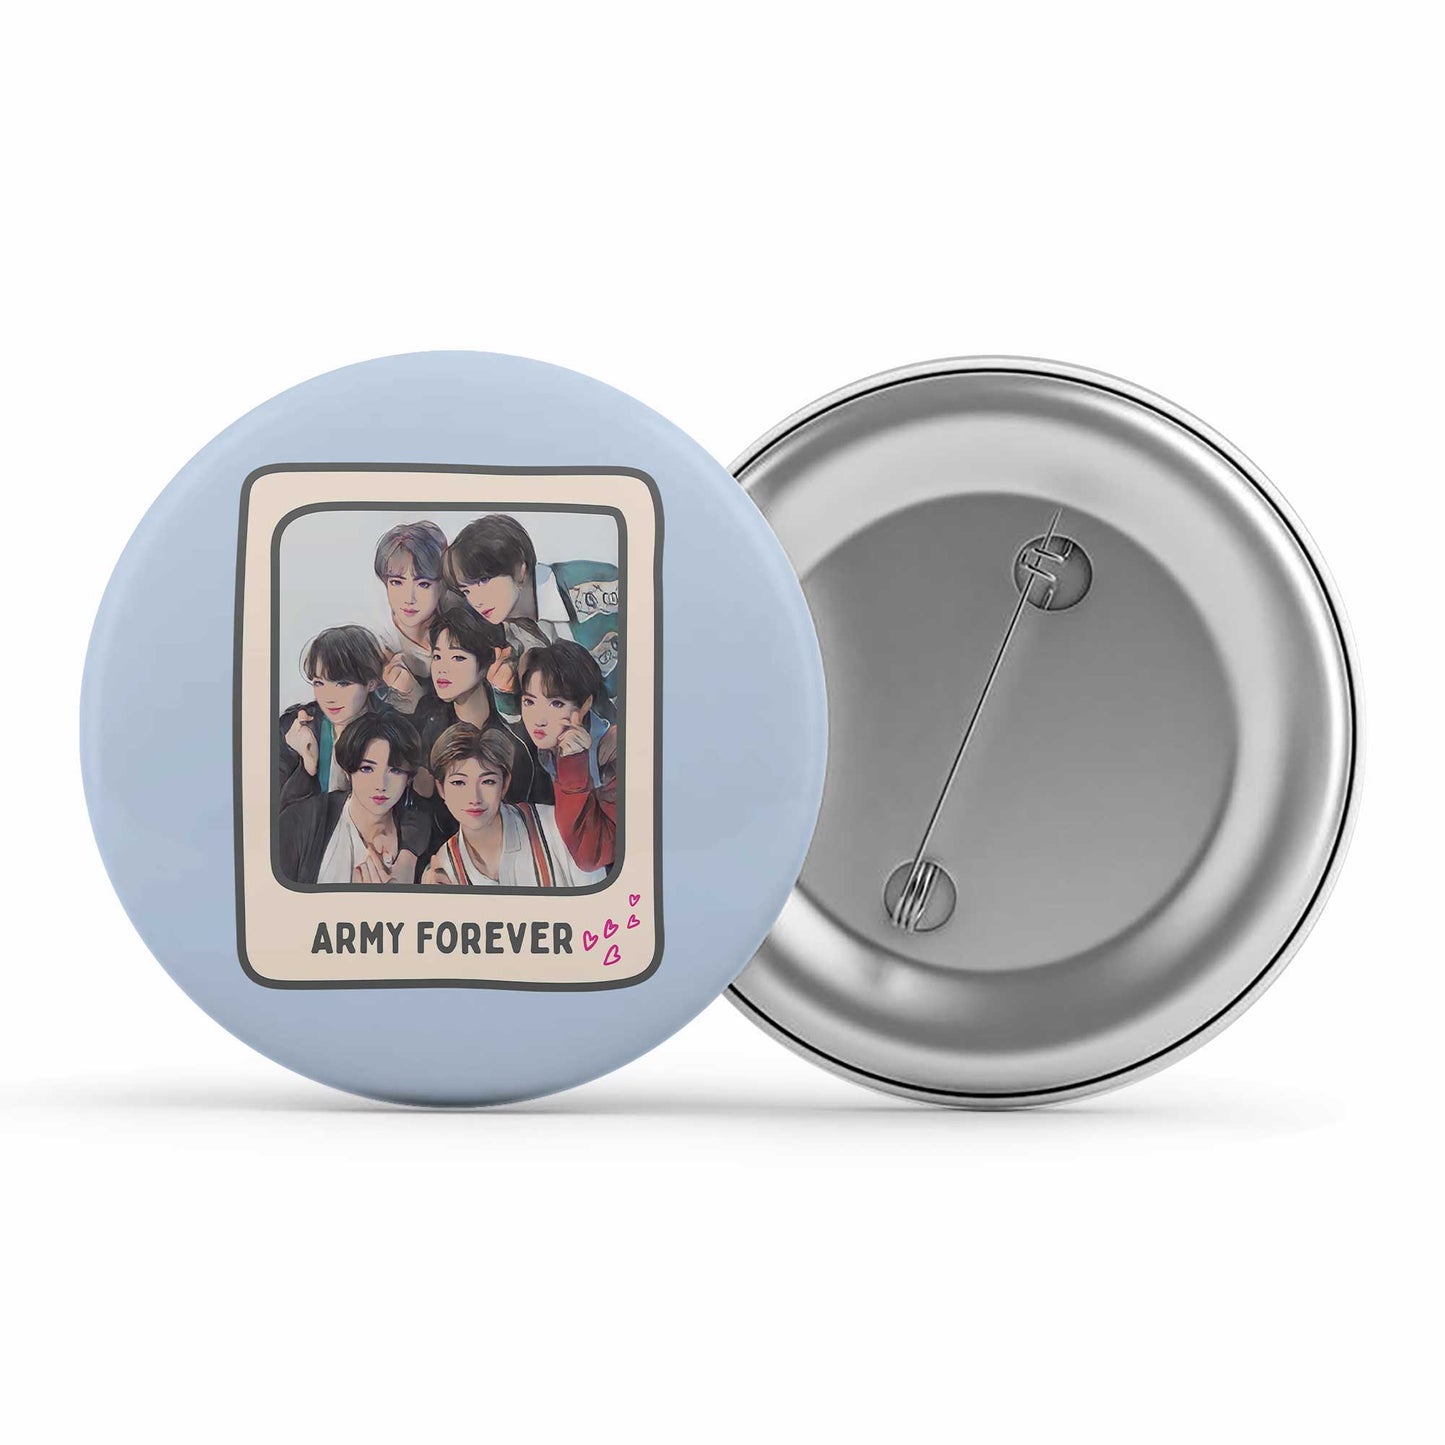 bts army forever badge pin button music band buy online india the banyan tee tbt men women girls boys unisex  